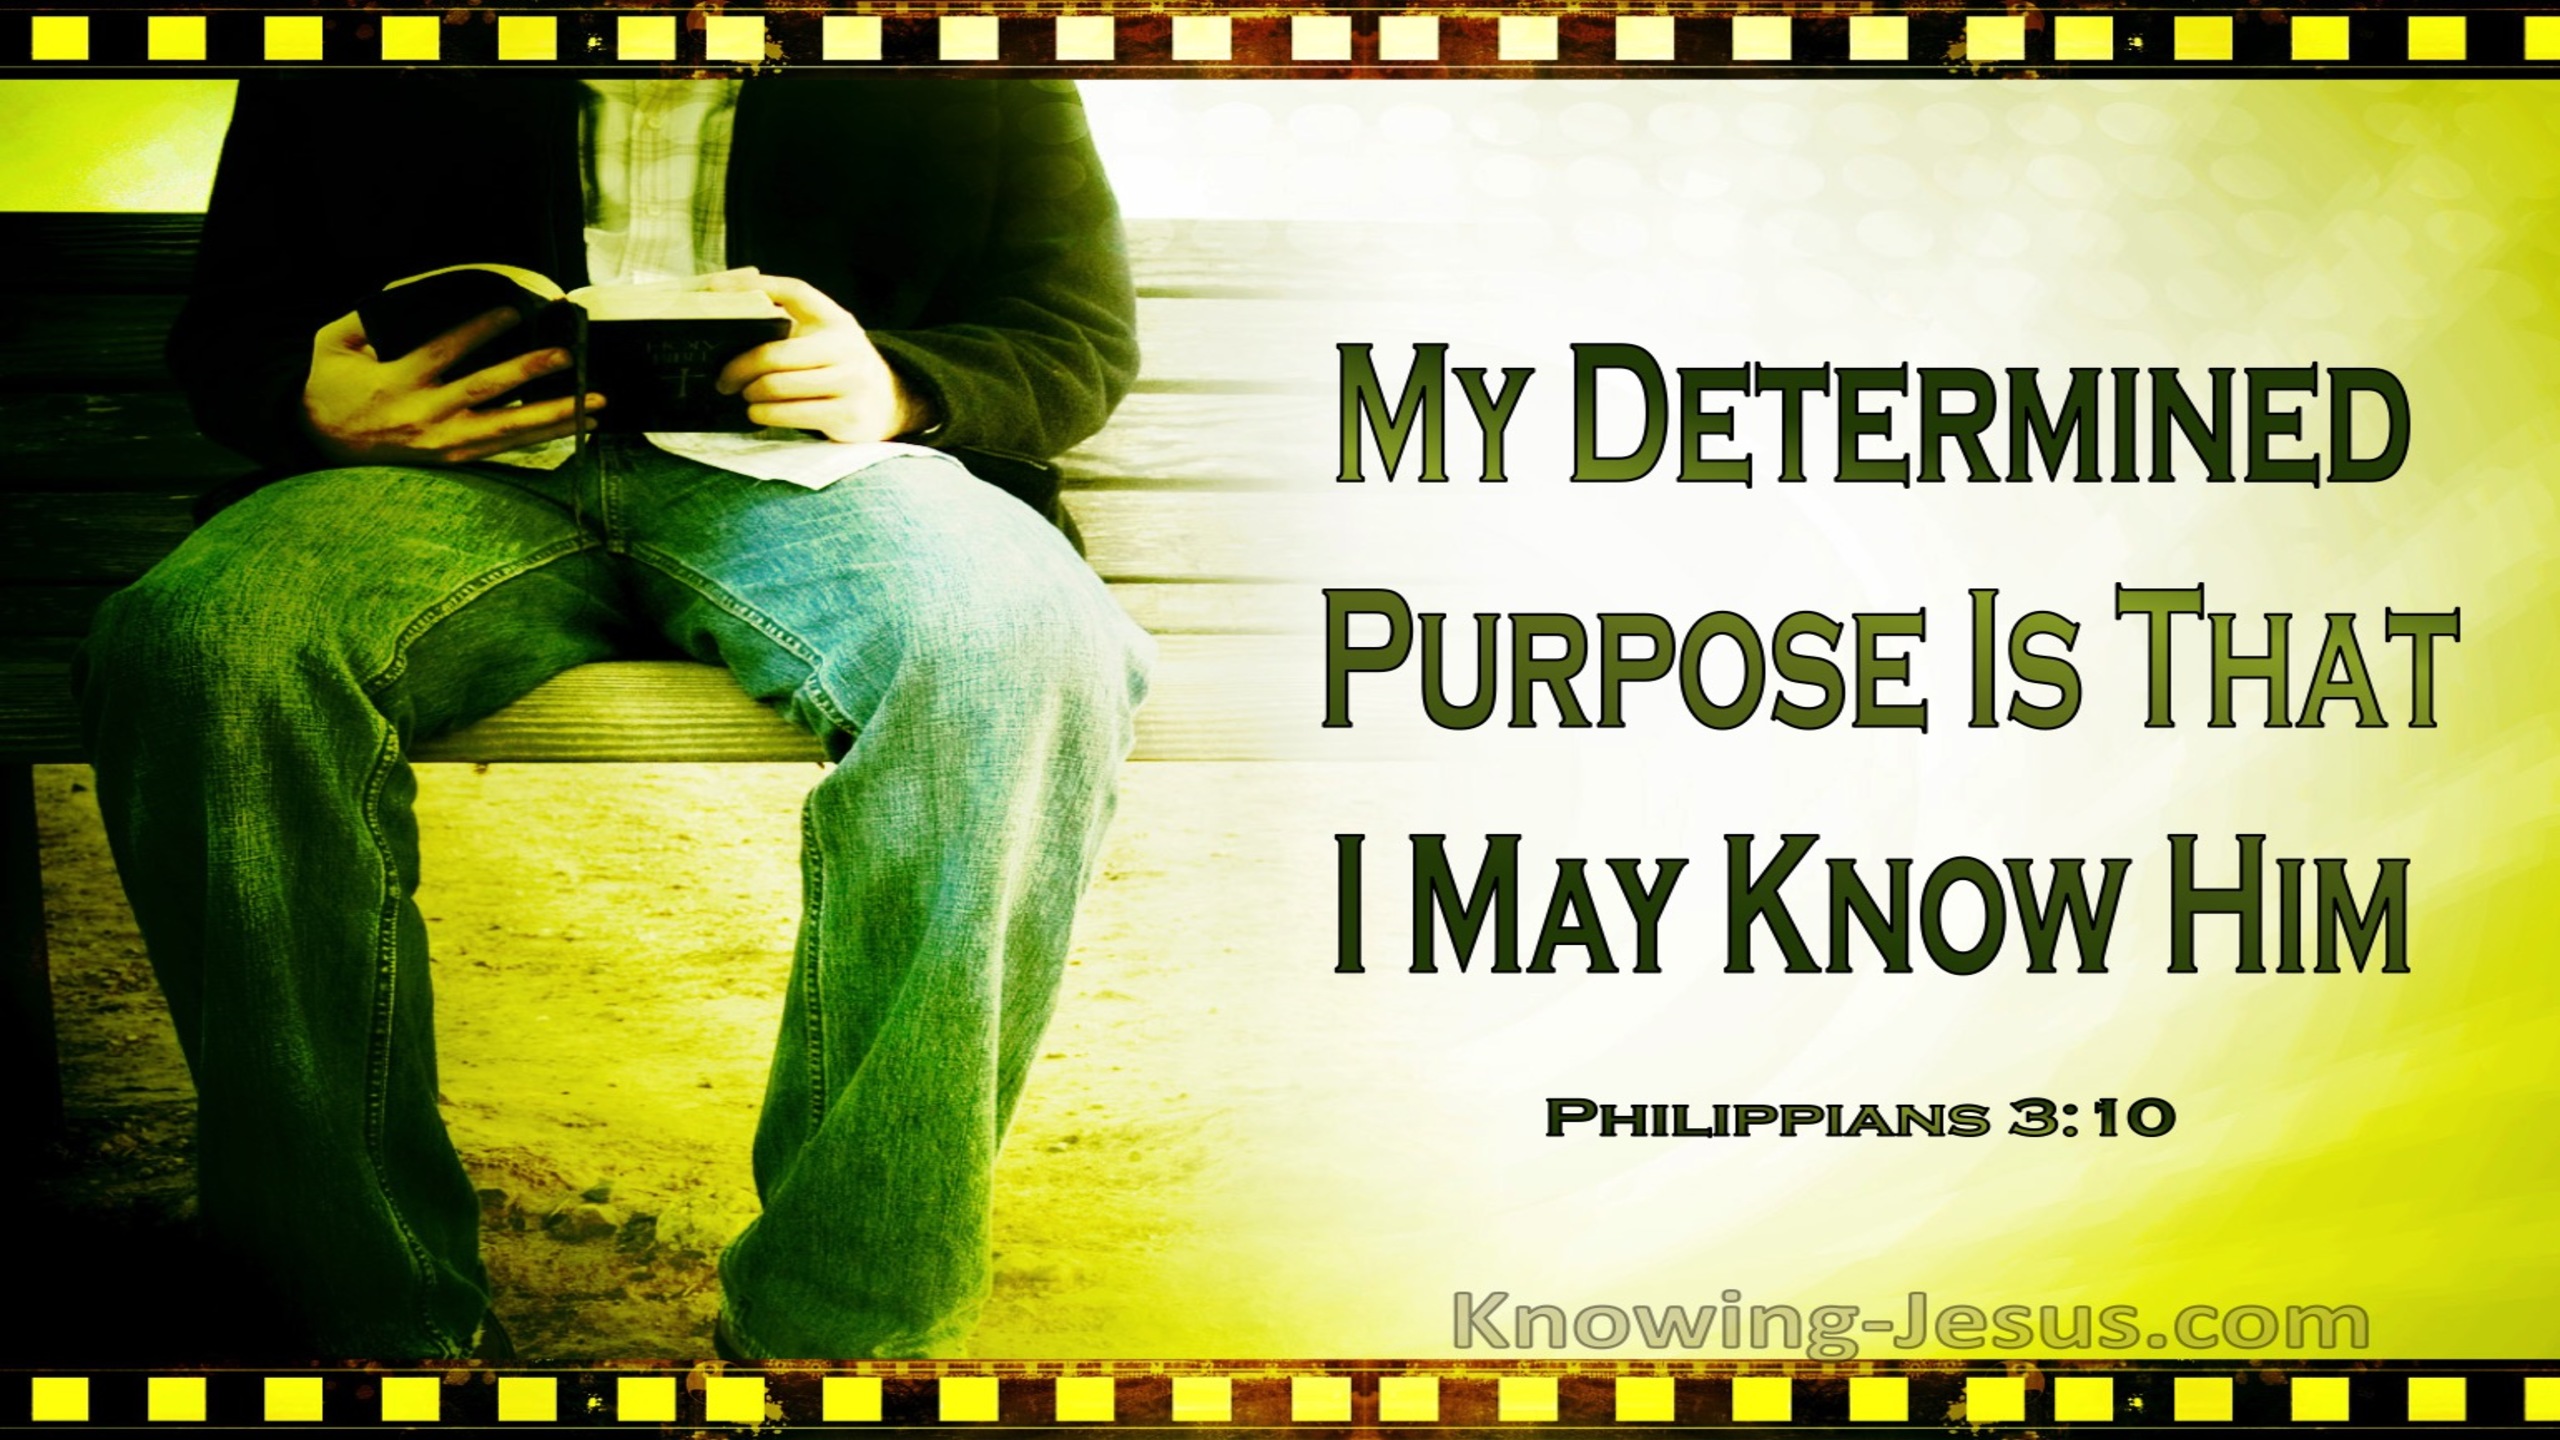 Philippians 3:10 My Determined Purpose Is That I May Know Him (windows)03:21